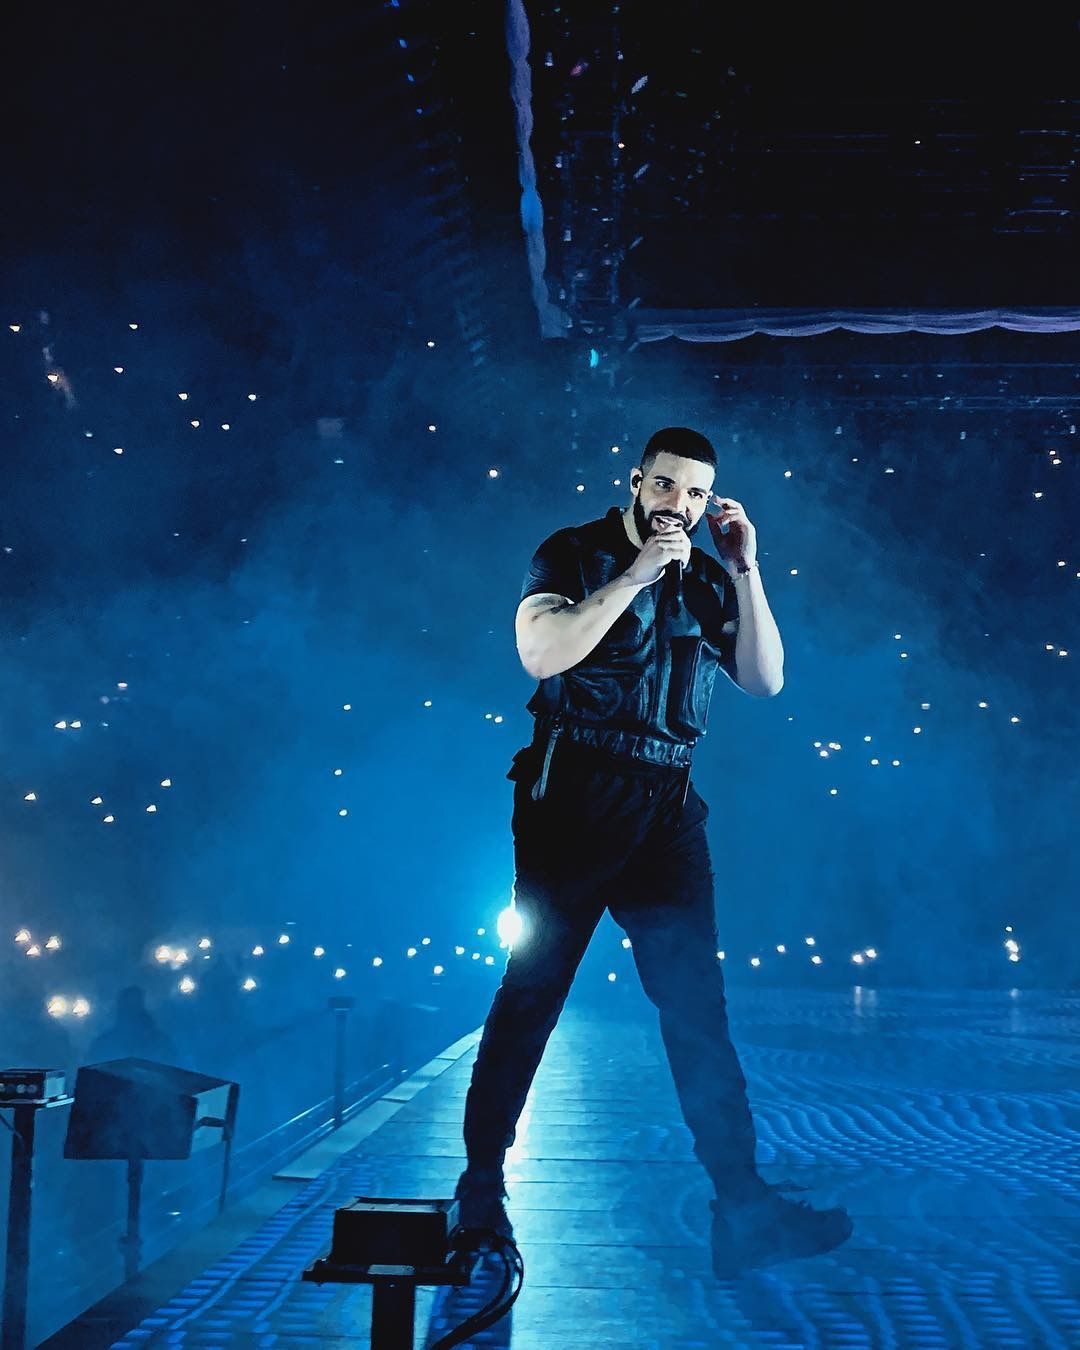 Drake on stage singing in a dark room with blue lights - Drake